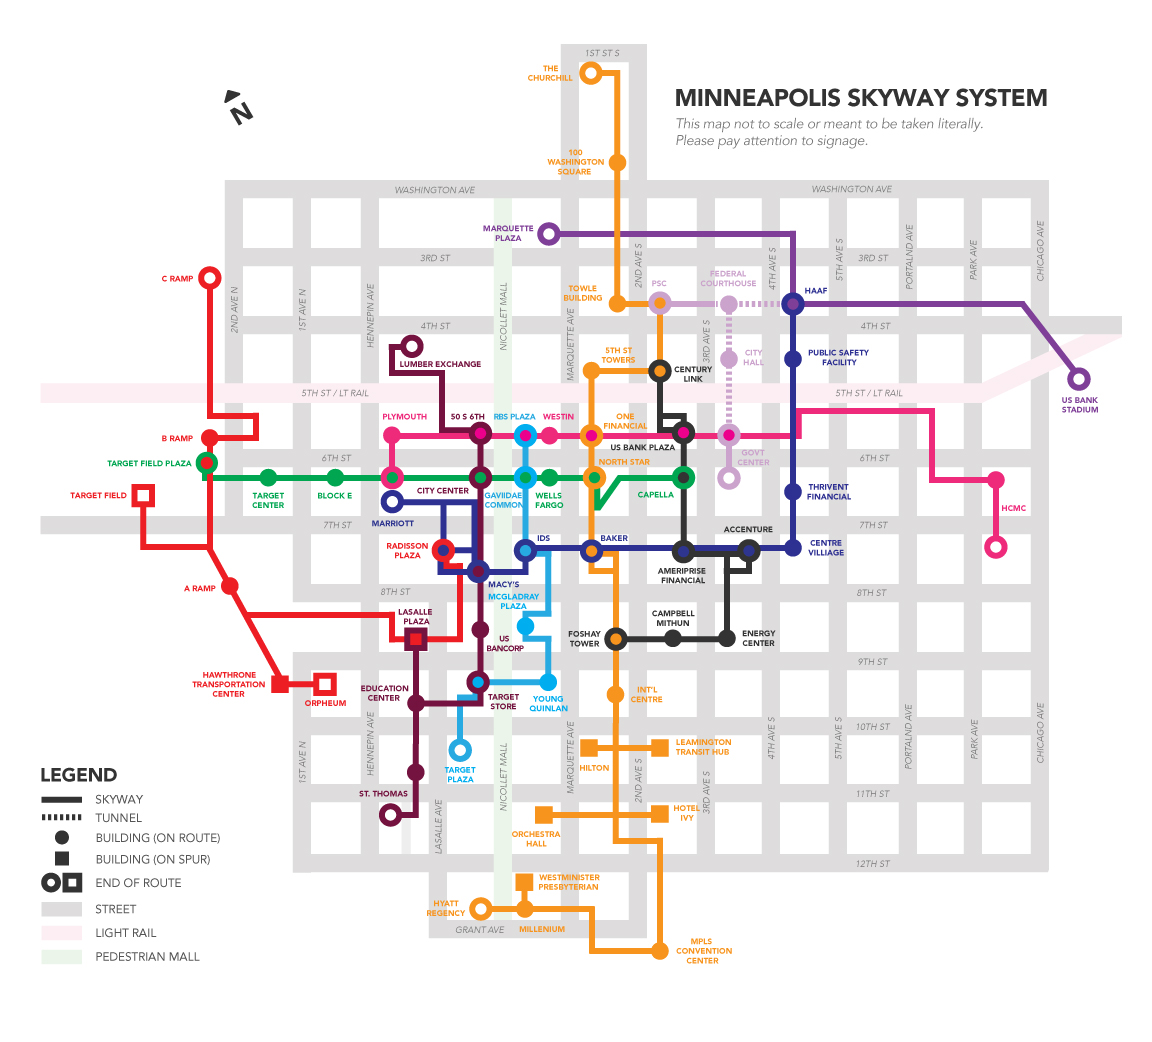 Brandon Hundt's Skyway map of Minneapolis using straight lines and grids with color coded routes